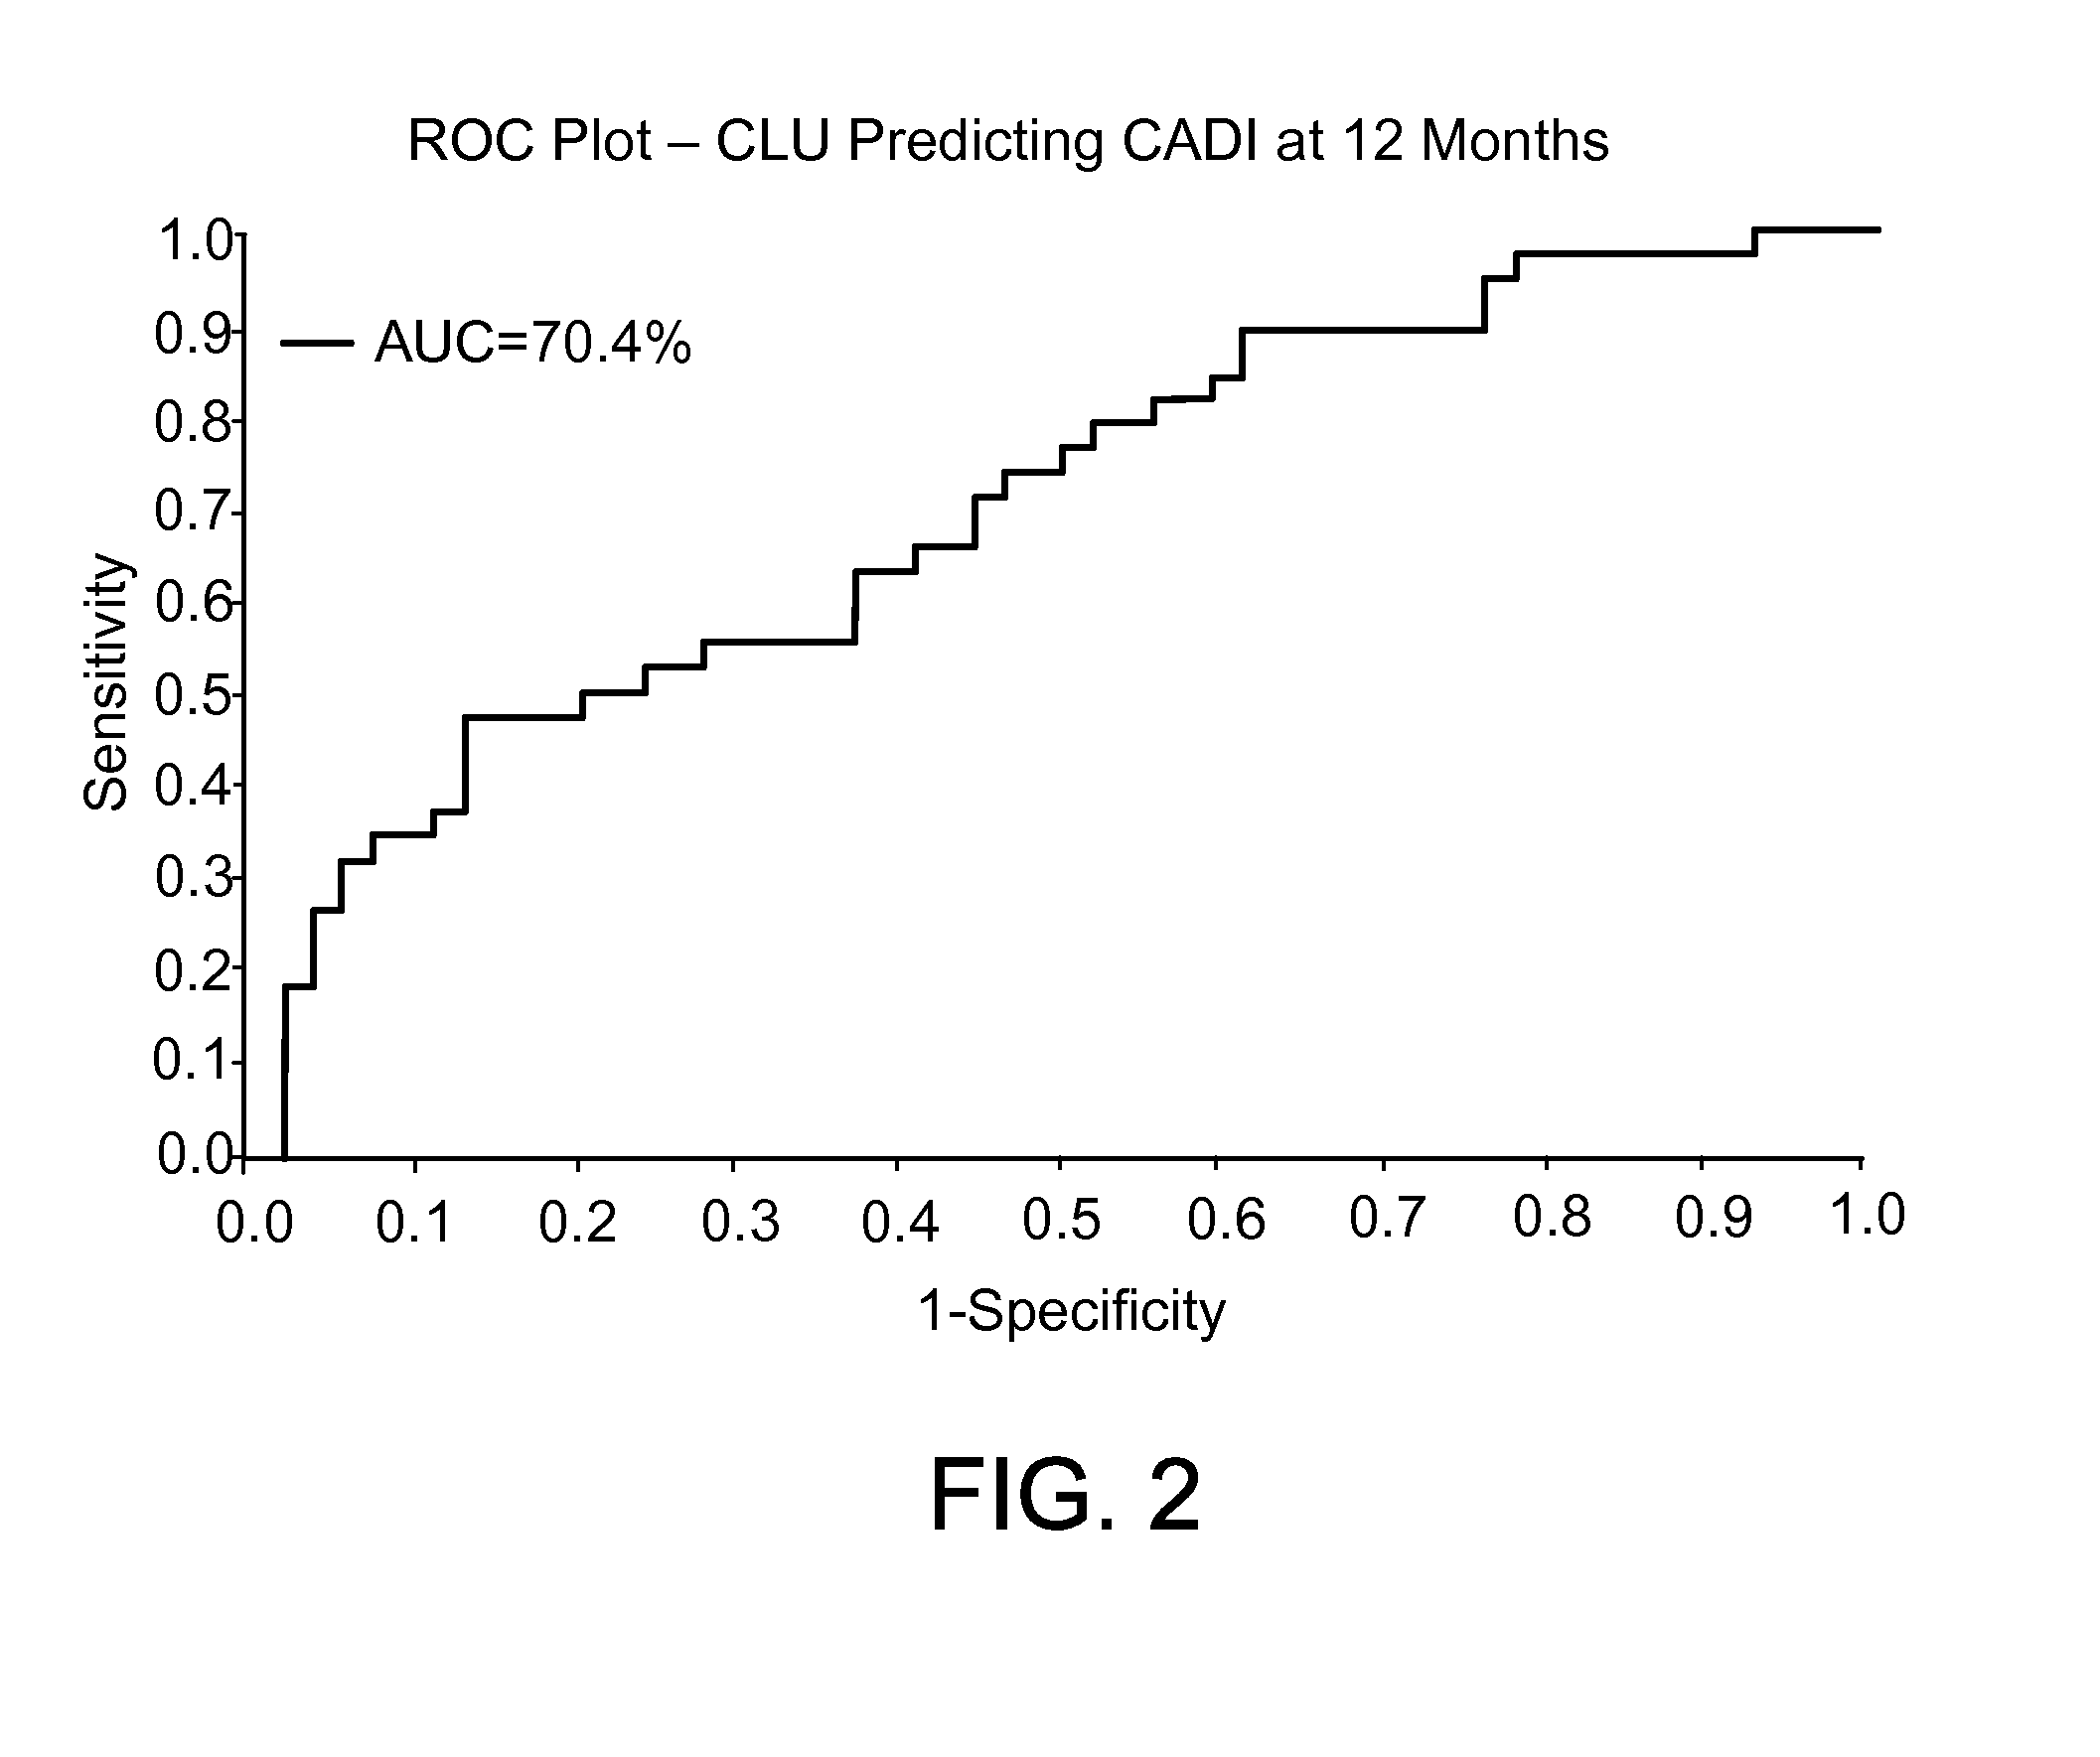 Method for predicting risk of exposure to interstitial fibrosis and tubular atrophy with clusterin